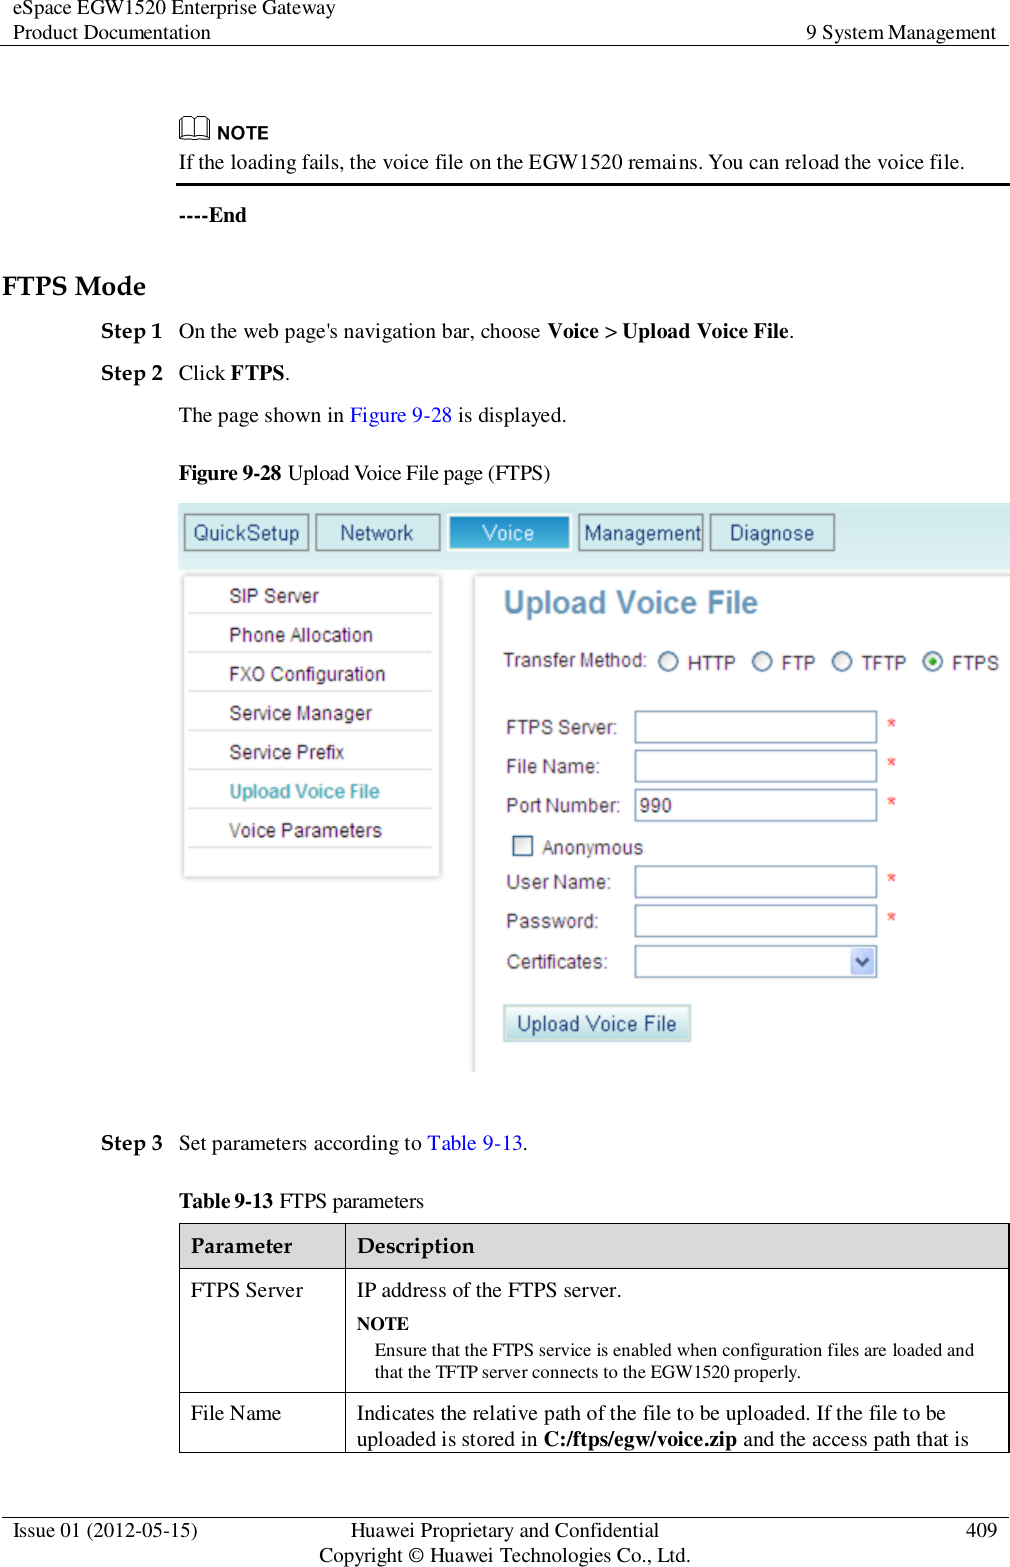 eSpace EGW1520 Enterprise Gateway Product Documentation 9 System Management  Issue 01 (2012-05-15) Huawei Proprietary and Confidential                                     Copyright © Huawei Technologies Co., Ltd. 409    If the loading fails, the voice file on the EGW1520 remains. You can reload the voice file. ----End FTPS Mode Step 1 On the web page&apos;s navigation bar, choose Voice &gt; Upload Voice File. Step 2 Click FTPS. The page shown in Figure 9-28 is displayed. Figure 9-28 Upload Voice File page (FTPS)   Step 3 Set parameters according to Table 9-13. Table 9-13 FTPS parameters Parameter Description FTPS Server IP address of the FTPS server. NOTE Ensure that the FTPS service is enabled when configuration files are loaded and that the TFTP server connects to the EGW1520 properly. File Name Indicates the relative path of the file to be uploaded. If the file to be uploaded is stored in C:/ftps/egw/voice.zip and the access path that is 